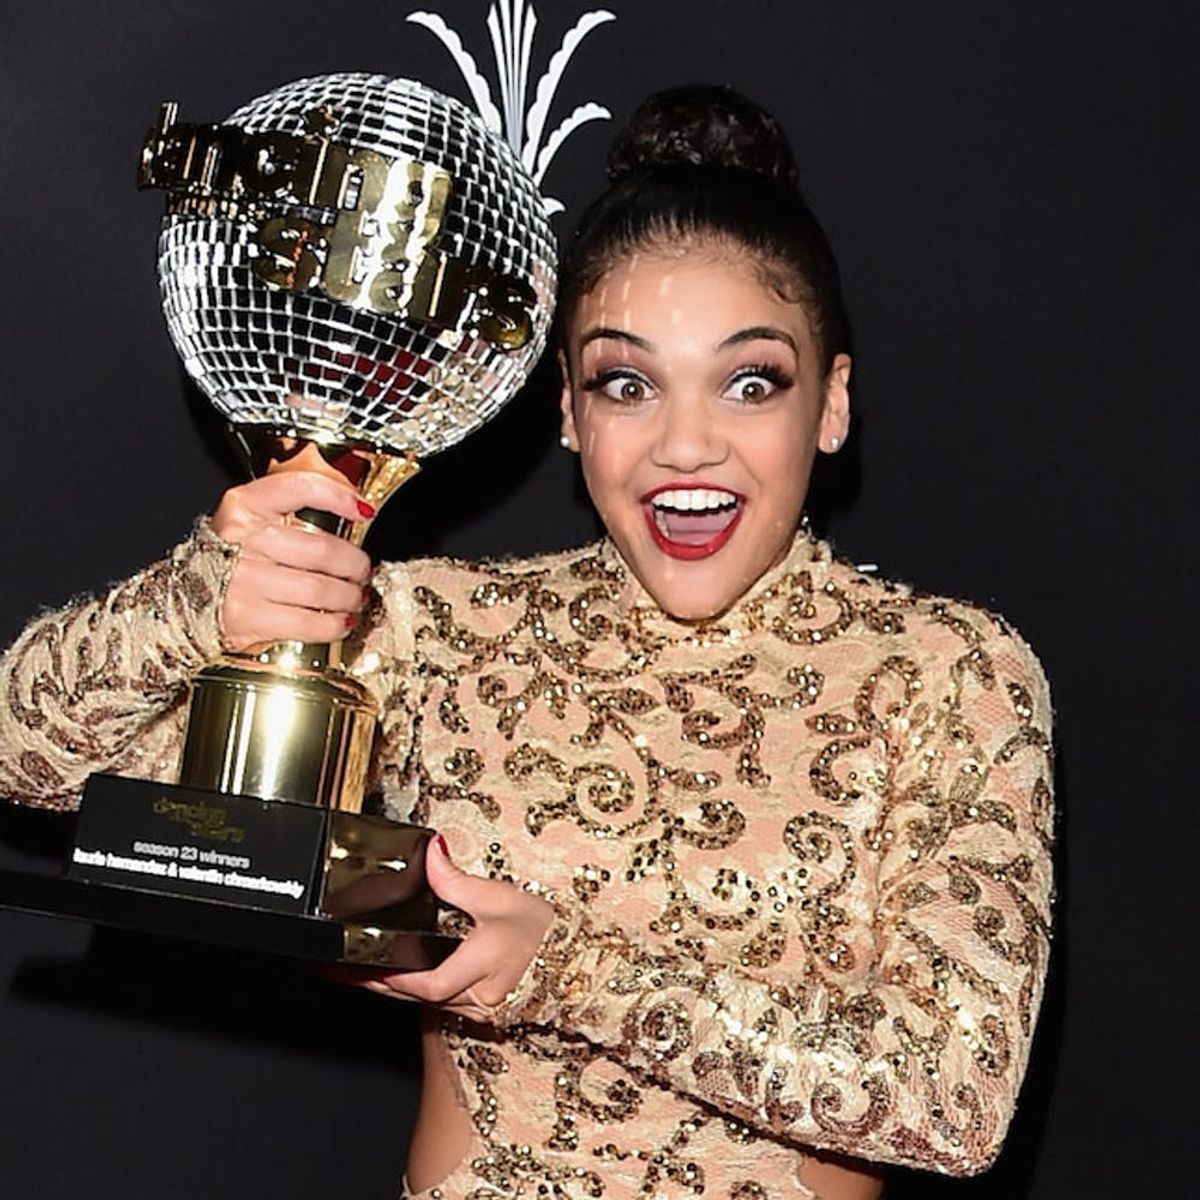 Morning Buzz! U.S. Gold Medalist Laurie Hernandez Won DWTS Giving the World Something to Smile About + More